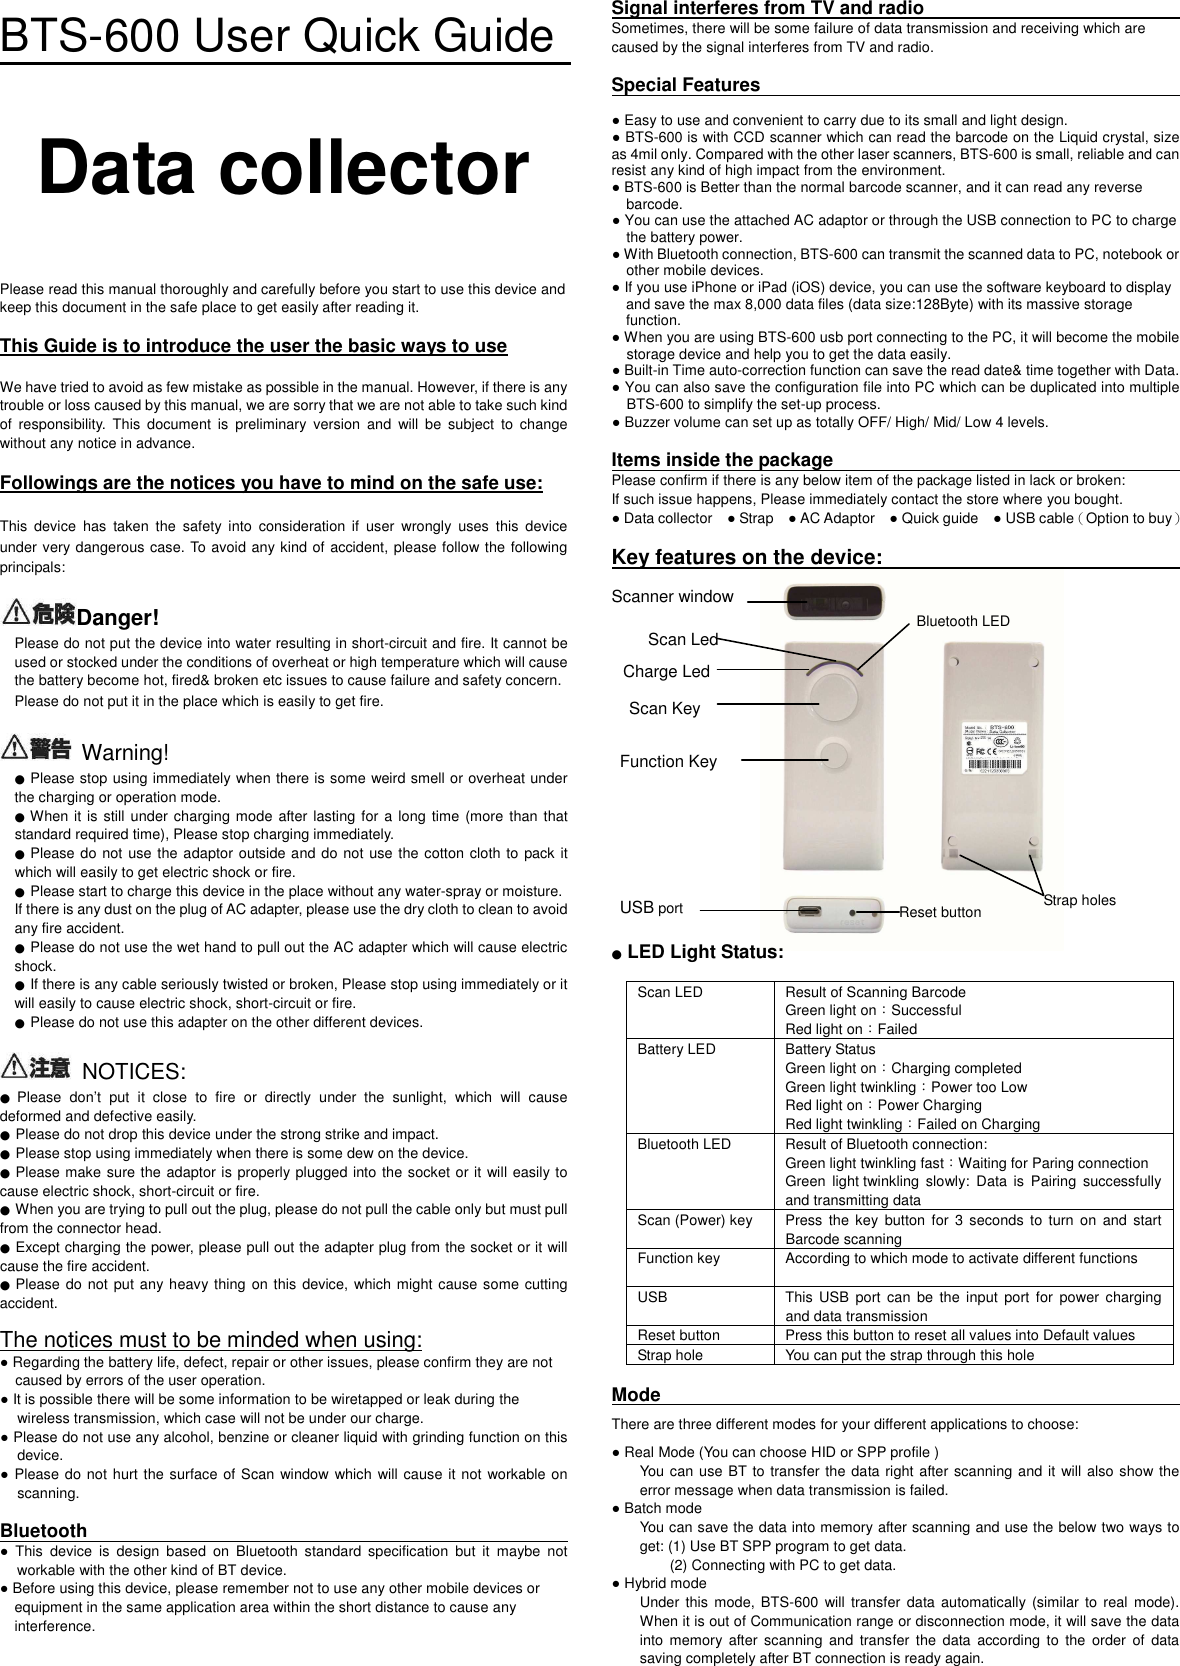 BTS-600 User Quick Guide  Data collector    Please read this manual thoroughly and carefully before you start to use this device and keep this document in the safe place to get easily after reading it.      This Guide is to introduce the user the basic ways to use  We have tried to avoid as few mistake as possible in the manual. However, if there is any trouble or loss caused by this manual, we are sorry that we are not able to take such kind of  responsibility.  This  document  is  preliminary  version  and  will  be  subject  to  change without any notice in advance.    Followings are the notices you have to mind on the safe use:  This  device  has  taken  the  safety  into  consideration  if  user  wrongly  uses  this  device under very dangerous case. To avoid any kind of accident, please follow the following principals:  Danger!  Please do not put the device into water resulting in short-circuit and fire. It cannot be used or stocked under the conditions of overheat or high temperature which will cause the battery become hot, fired&amp; broken etc issues to cause failure and safety concern.         Please do not put it in the place which is easily to get fire.      Warning! ● Please stop using immediately when there is some weird smell or overheat under the charging or operation mode.   ● When it is still under charging mode after lasting for a long time (more  than that standard required time), Please stop charging immediately. ● Please do not use the adaptor outside and do not use the cotton cloth to pack it which will easily to get electric shock or fire.   ● Please start to charge this device in the place without any water-spray or moisture.   If there is any dust on the plug of AC adapter, please use the dry cloth to clean to avoid any fire accident.   ● Please do not use the wet hand to pull out the AC adapter which will cause electric shock.   ● If there is any cable seriously twisted or broken, Please stop using immediately or it will easily to cause electric shock, short-circuit or fire.   ● Please do not use this adapter on the other different devices.    NOTICES: ● Please  don’t  put  it  close  to  fire  or  directly  under  the  sunlight,  which  will  cause deformed and defective easily.   ● Please do not drop this device under the strong strike and impact. ● Please stop using immediately when there is some dew on the device.   ● Please make sure the adaptor is properly plugged into the socket or it will easily to cause electric shock, short-circuit or fire.   ● When you are trying to pull out the plug, please do not pull the cable only but must pull from the connector head.   ● Except charging the power, please pull out the adapter plug from the socket or it will cause the fire accident.   ● Please do  not put any heavy thing on this device,  which might cause some cutting accident.    The notices must to be minded when using: ● Regarding the battery life, defect, repair or other issues, please confirm they are not caused by errors of the user operation.   ● It is possible there will be some information to be wiretapped or leak during the wireless transmission, which case will not be under our charge.   ● Please do not use any alcohol, benzine or cleaner liquid with grinding function on this device.     ● Please do not hurt the surface of Scan window which  will cause it not workable on scanning.    Bluetooth                                                                                                                                       ●  This  device  is  design  based  on  Bluetooth  standard  specification  but  it  maybe  not workable with the other kind of BT device.     ● Before using this device, please remember not to use any other mobile devices or       equipment in the same application area within the short distance to cause any         interference.     Signal interferes from TV and radio                                                                                                Sometimes, there will be some failure of data transmission and receiving which are caused by the signal interferes from TV and radio.  Special Features                                                                                                                                                      ● Easy to use and convenient to carry due to its small and light design. ● BTS-600 is with CCD scanner which can read the barcode on the Liquid crystal, size as 4mil only. Compared with the other laser scanners, BTS-600 is small, reliable and can resist any kind of high impact from the environment.   ● BTS-600 is Better than the normal barcode scanner, and it can read any reverse         barcode.   ● You can use the attached AC adaptor or through the USB connection to PC to charge       the battery power.   ● With Bluetooth connection, BTS-600 can transmit the scanned data to PC, notebook or other mobile devices.   ● If you use iPhone or iPad (iOS) device, you can use the software keyboard to display         and save the max 8,000 data files (data size:128Byte) with its massive storage       function. ● When you are using BTS-600 usb port connecting to the PC, it will become the mobile storage device and help you to get the data easily.   ● Built-in Time auto-correction function can save the read date&amp; time together with Data.   ● You can also save the configuration file into PC which can be duplicated into multiple BTS-600 to simplify the set-up process. ● Buzzer volume can set up as totally OFF/ High/ Mid/ Low 4 levels.    Items inside the package                                                                                                        Please confirm if there is any below item of the package listed in lack or broken:   If such issue happens, Please immediately contact the store where you bought.   ● Data collector    ● Strap    ● AC Adaptor    ● Quick guide    ● USB cable（Option to buy）  Key features on the device:                                                                                                                      Scanner window                   ● LED Light Status:  Scan LED  Result of Scanning Barcode     Green light on：Successful   Red light on：Failed   Battery LED  Battery Status   Green light on：Charging completed   Green light twinkling：Power too Low   Red light on：Power Charging Red light twinkling：Failed on Charging   Bluetooth LED  Result of Bluetooth connection:   Green light twinkling fast：Waiting for Paring connection Green  light twinkling  slowly:  Data  is  Pairing  successfully and transmitting data Scan (Power) key  Press  the key  button  for  3  seconds  to turn  on  and  start Barcode scanning Function key  According to which mode to activate different functions  USB  This  USB  port can  be  the  input port  for  power charging and data transmission Reset button  Press this button to reset all values into Default values Strap hole  You can put the strap through this hole  Mode                                                                                                                            There are three different modes for your different applications to choose: ● Real Mode (You can choose HID or SPP profile )   You can use BT to transfer the data right after scanning and it  will also show the error message when data transmission is failed.   ● Batch mode   You can save the data into memory after scanning and use the below two ways to get: (1) Use BT SPP program to get data. (2) Connecting with PC to get data.   ● Hybrid mode Under  this  mode, BTS-600  will  transfer  data  automatically (similar  to real  mode). When it is out of Communication range or disconnection mode, it will save the data into  memory  after  scanning  and  transfer  the  data  according  to  the  order  of  data saving completely after BT connection is ready again.    Bluetooth LED Scan Led USB port Reset button Strap holes Charge Led Scan Key Function Key 